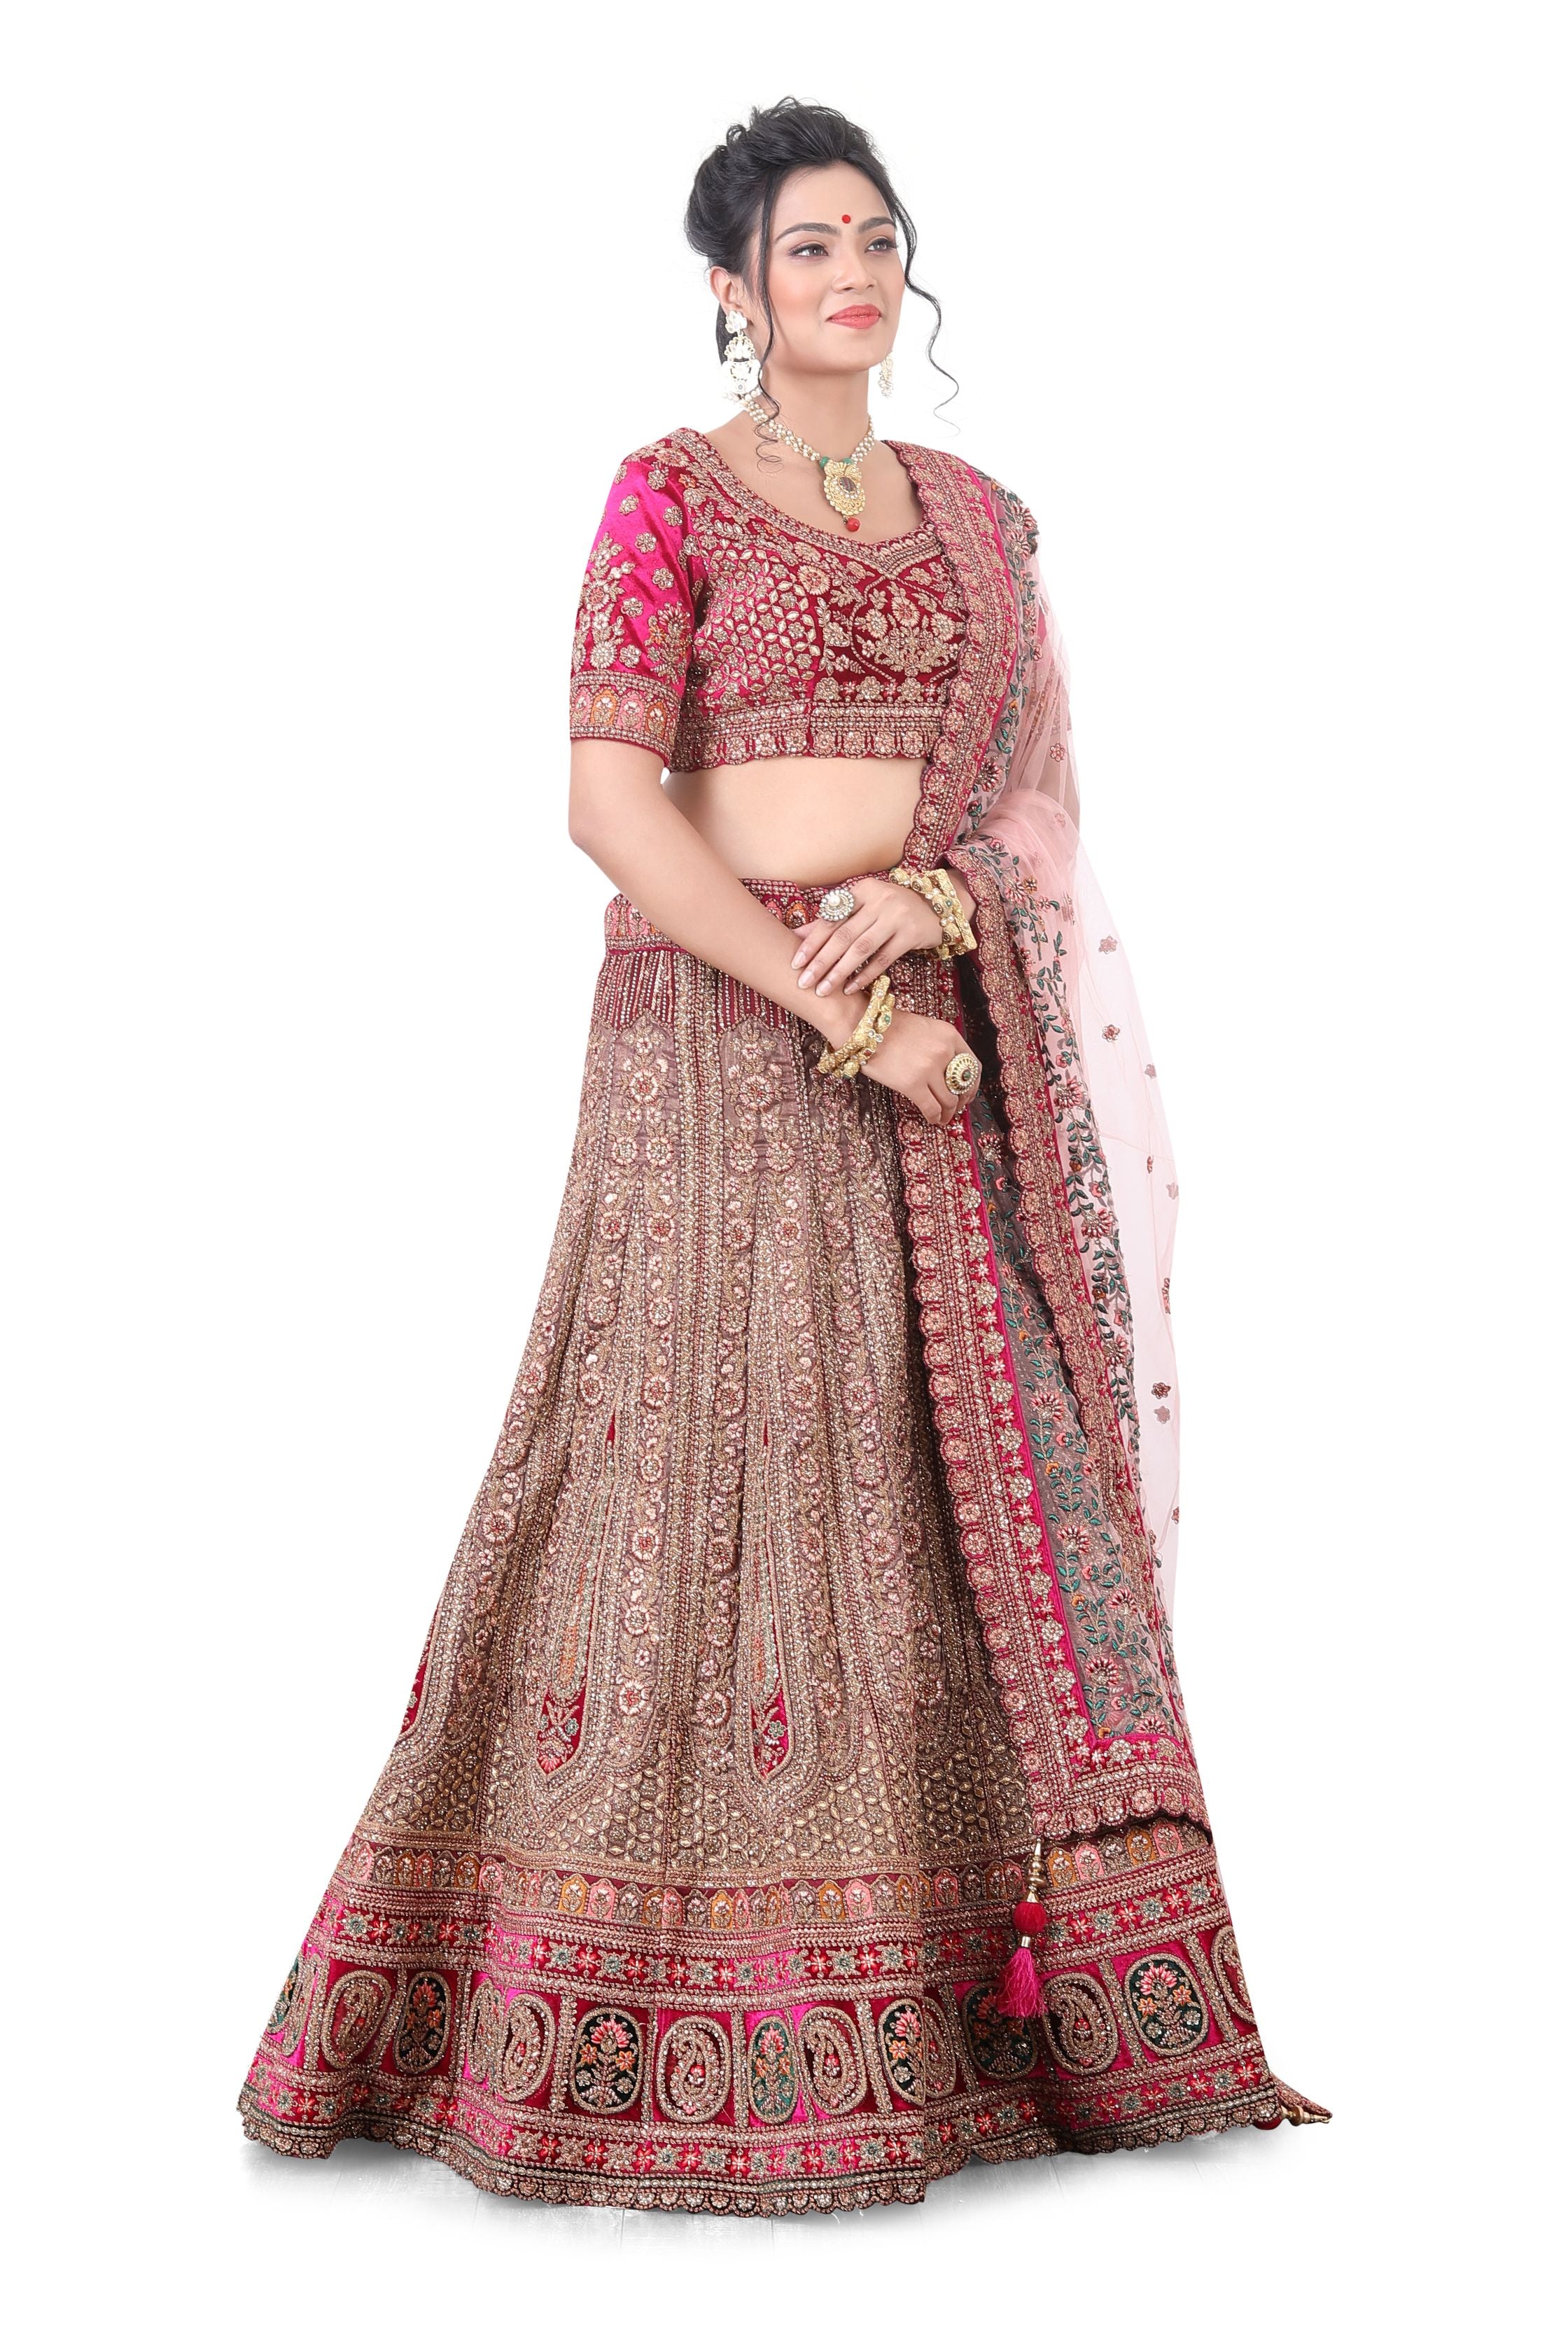 Tissue and Velvet Bridal Lehenga Choli in Pink and Gold color